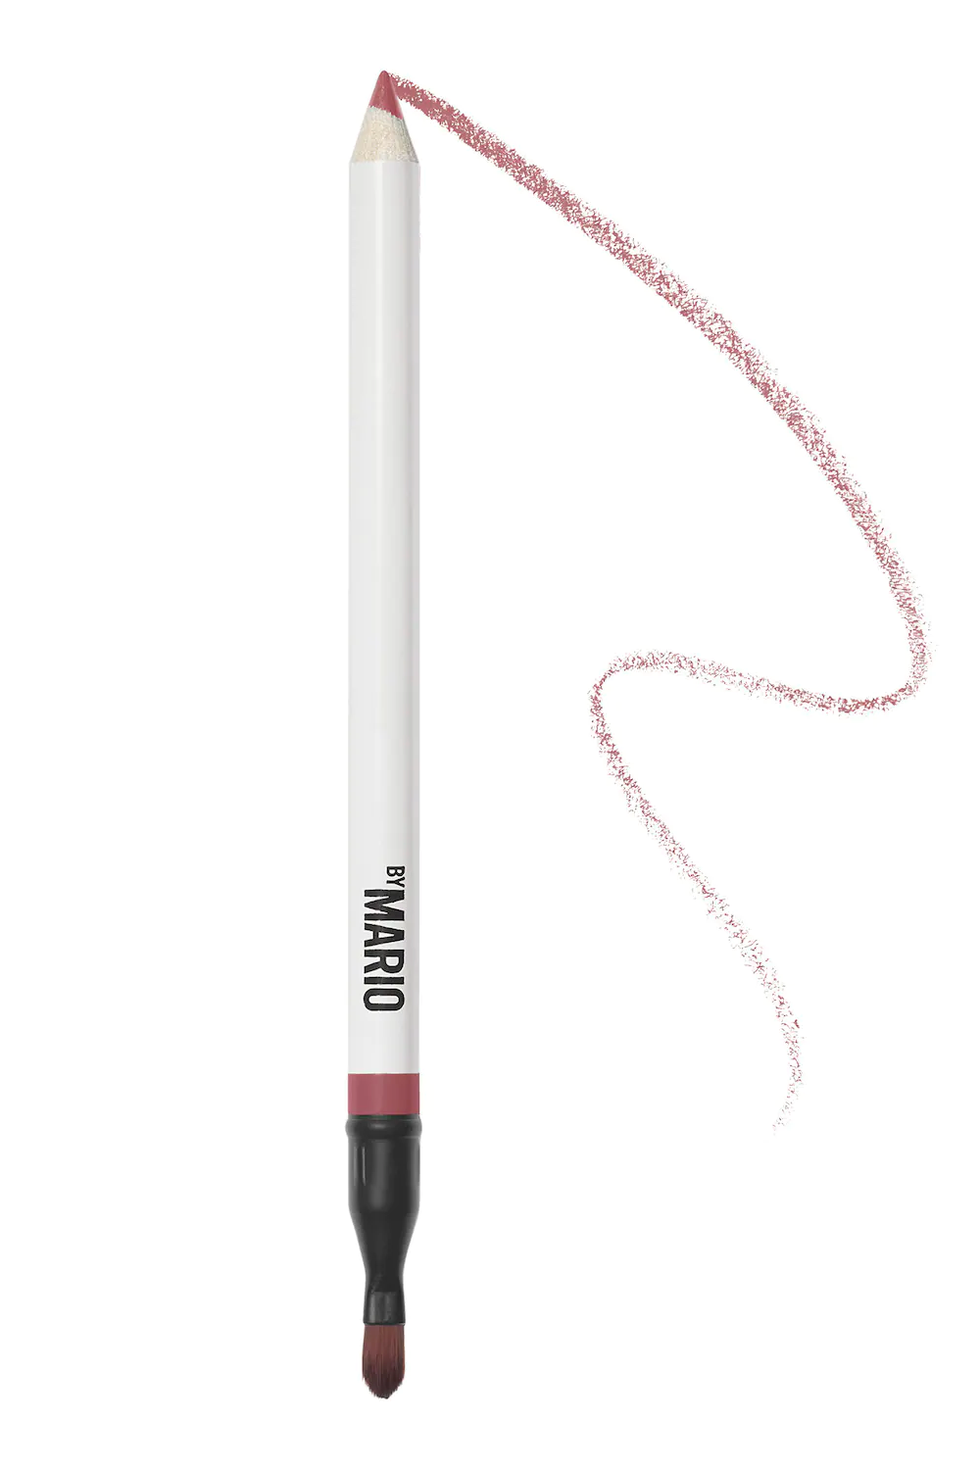 Nude Lip Liner: The #1 Best Selling Chanel Liner